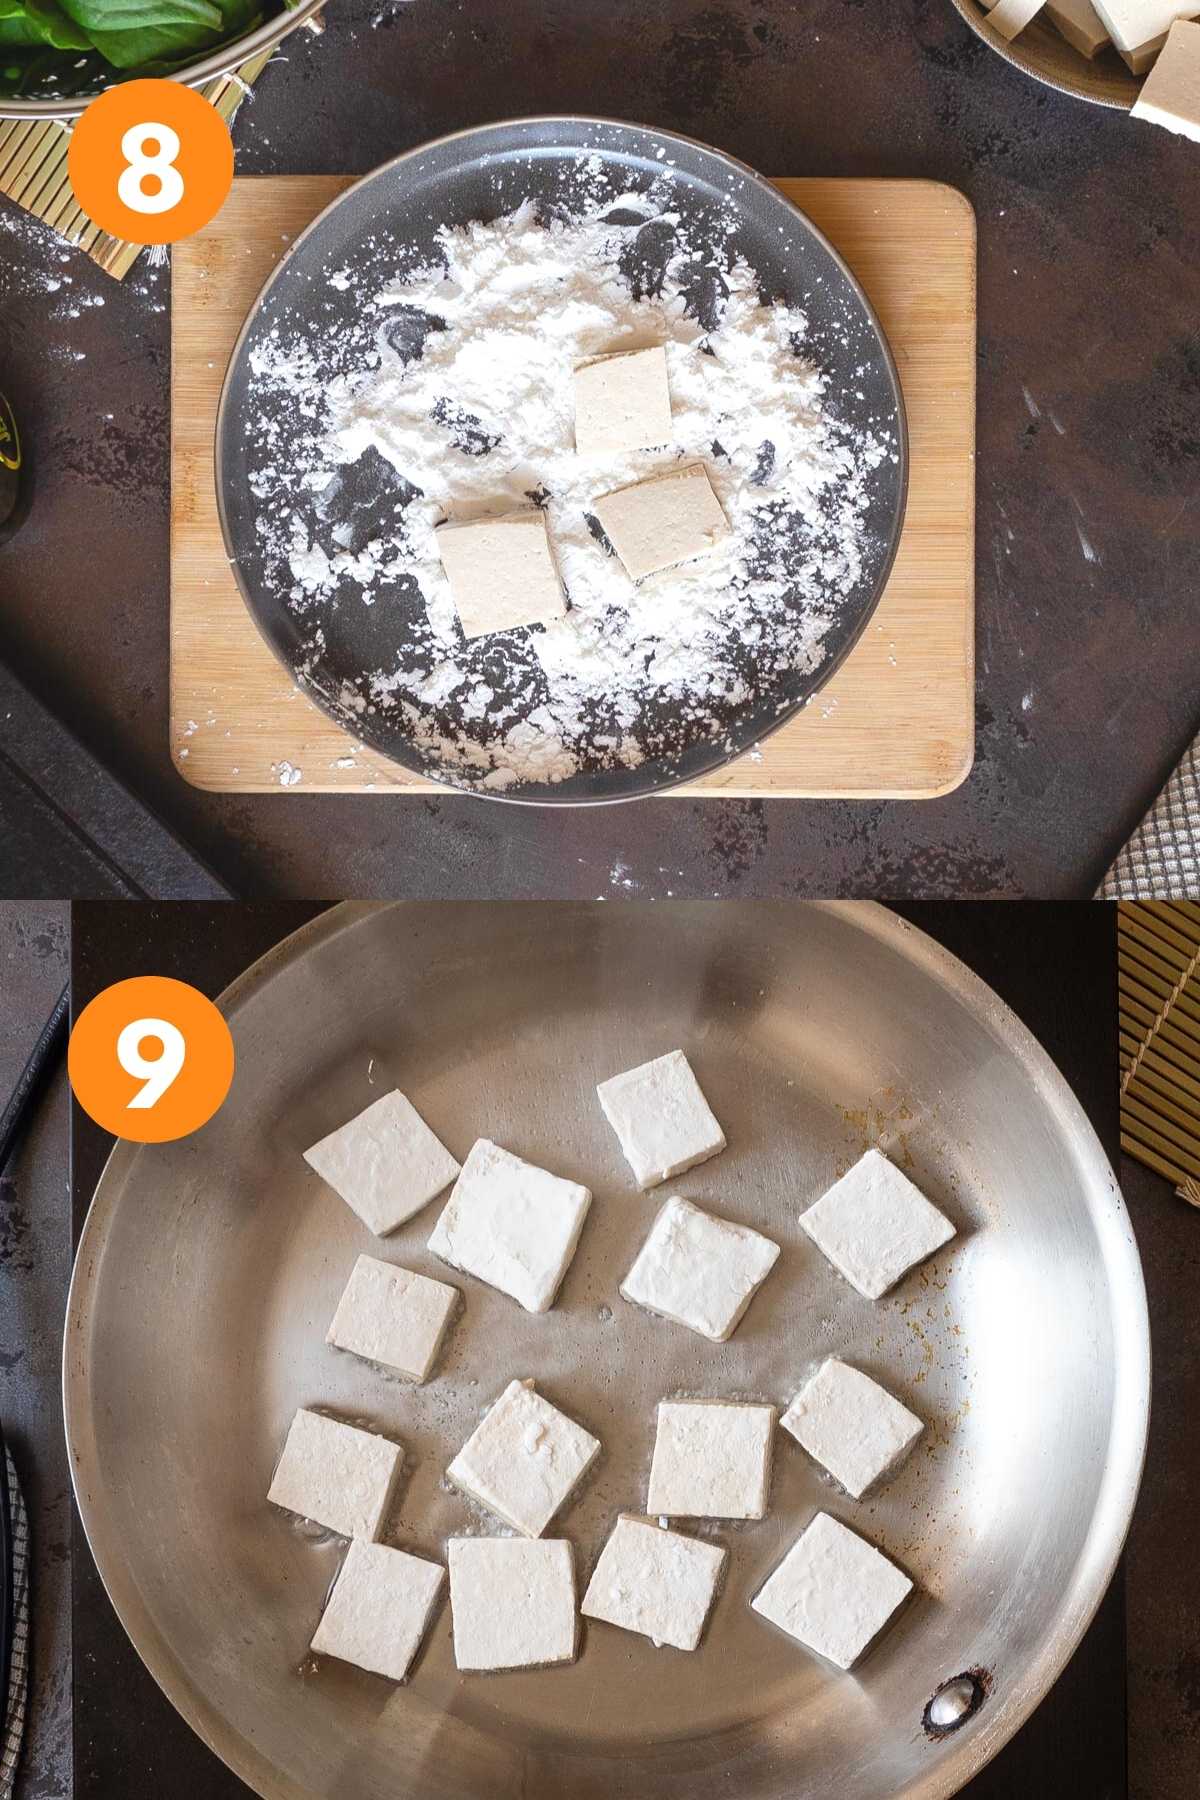 Dusting the tofu with cornstarch and cooking it in a pan.